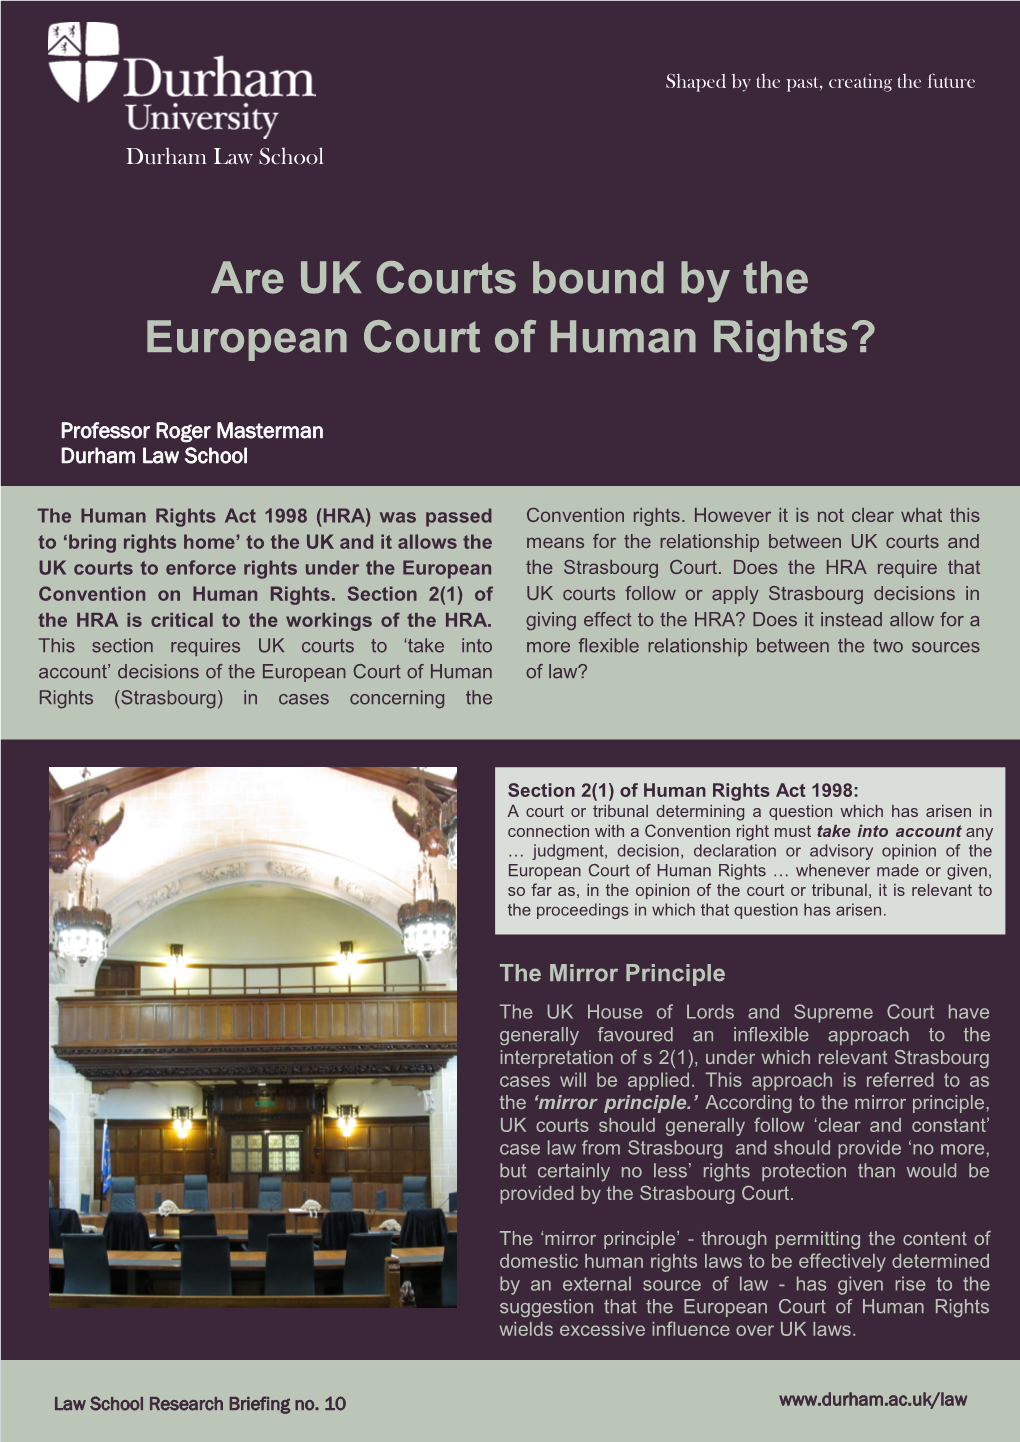 Are UK Courts Bound by the European Court of Human Rights?